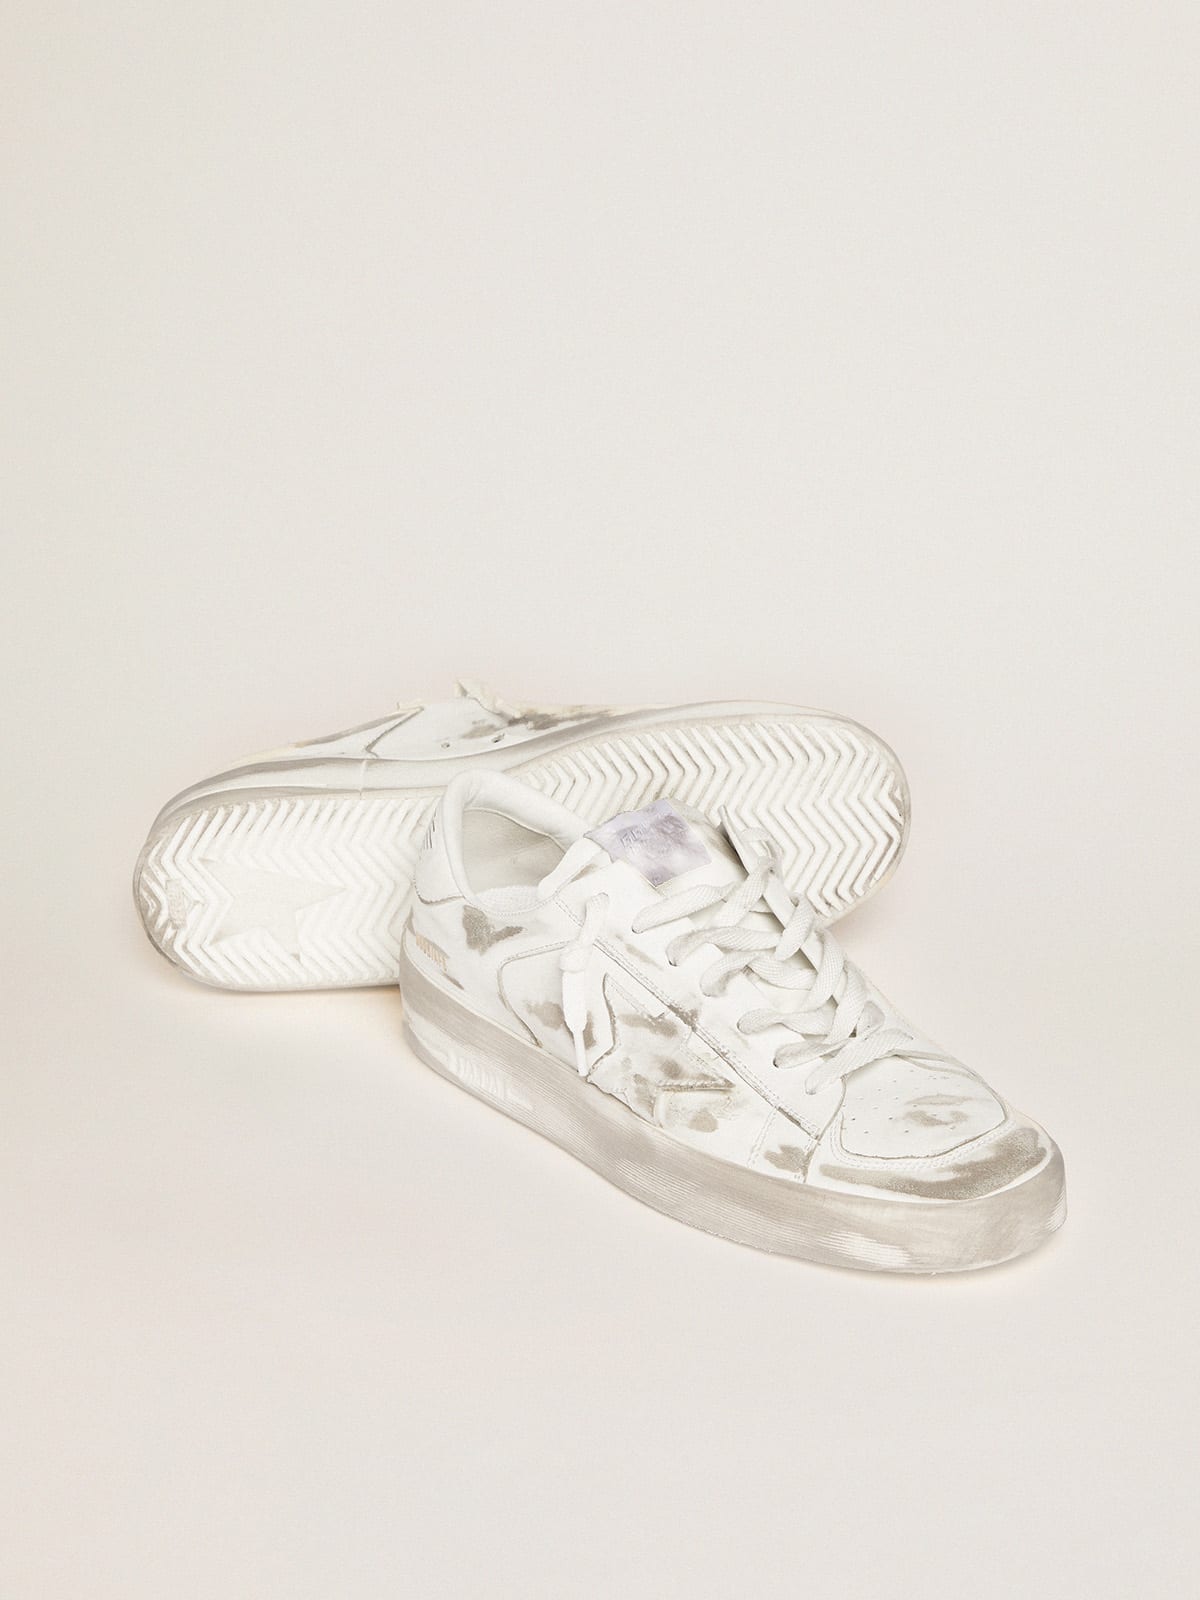 Golden Goose - Men's Stardan in white leather with distressed effect in 